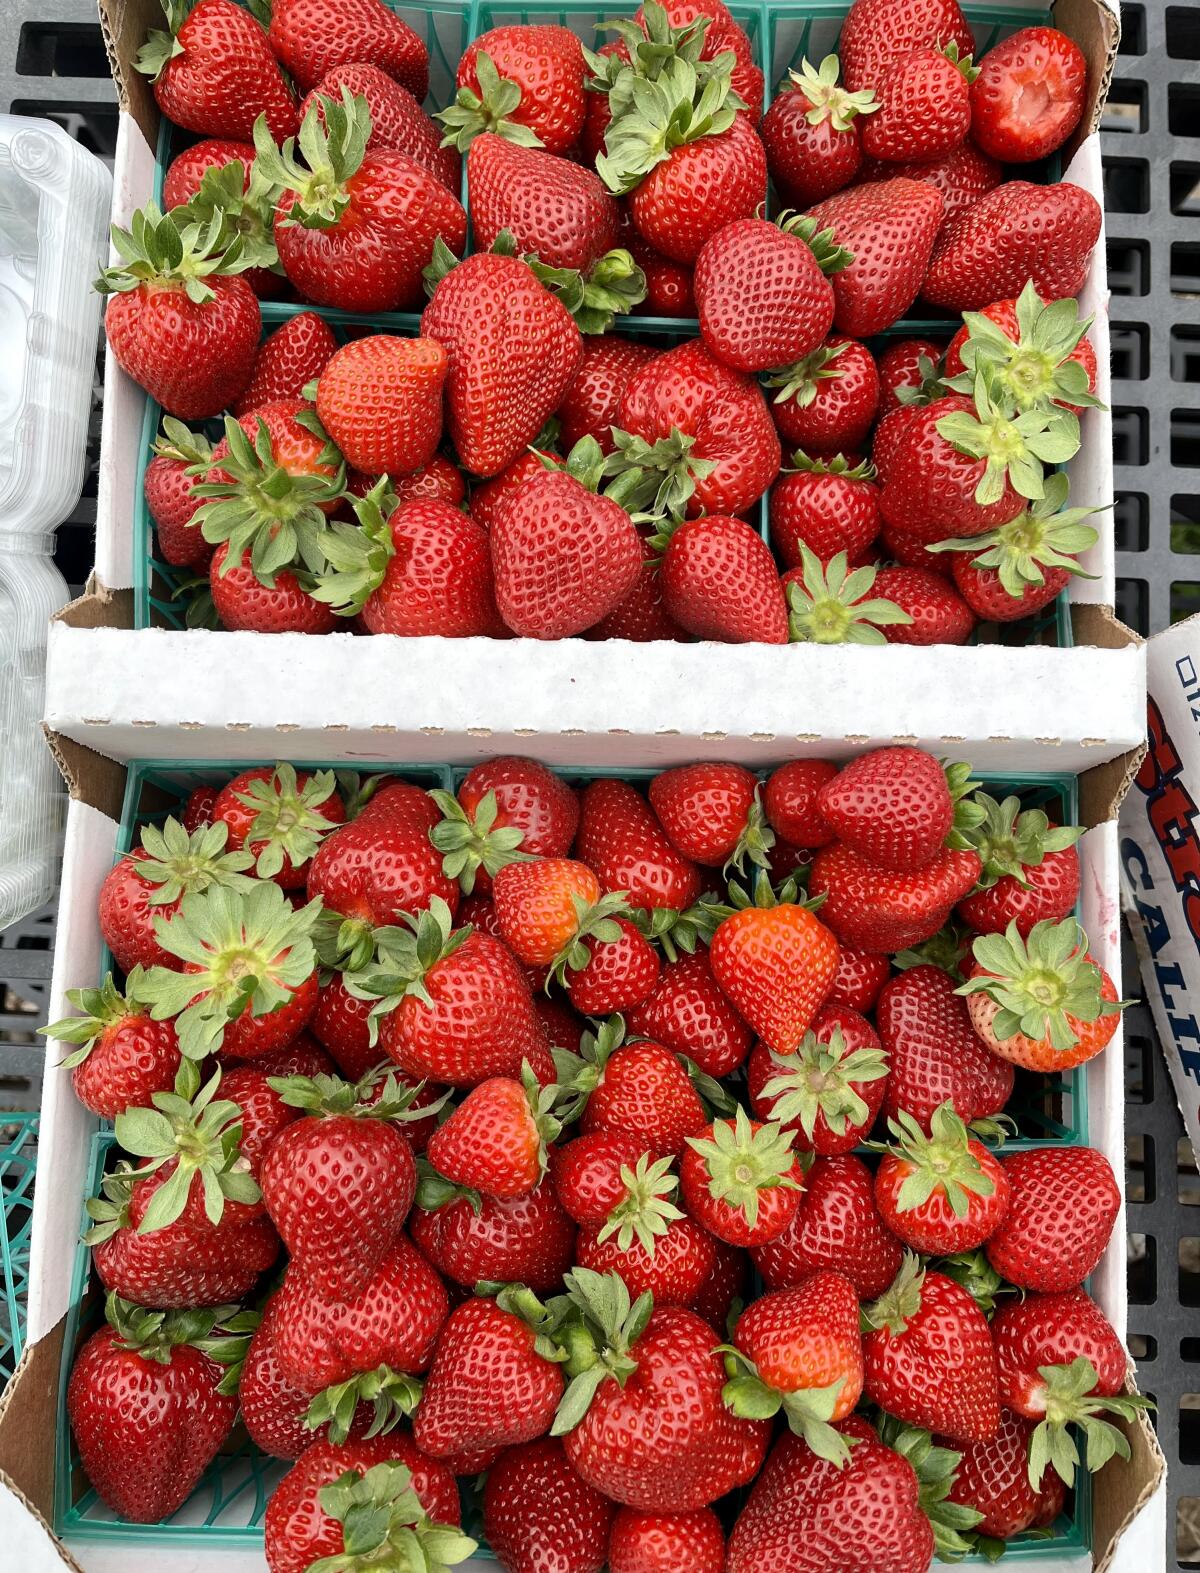 Freshly harvested strawberries at Westminster High School's Giving Farm.